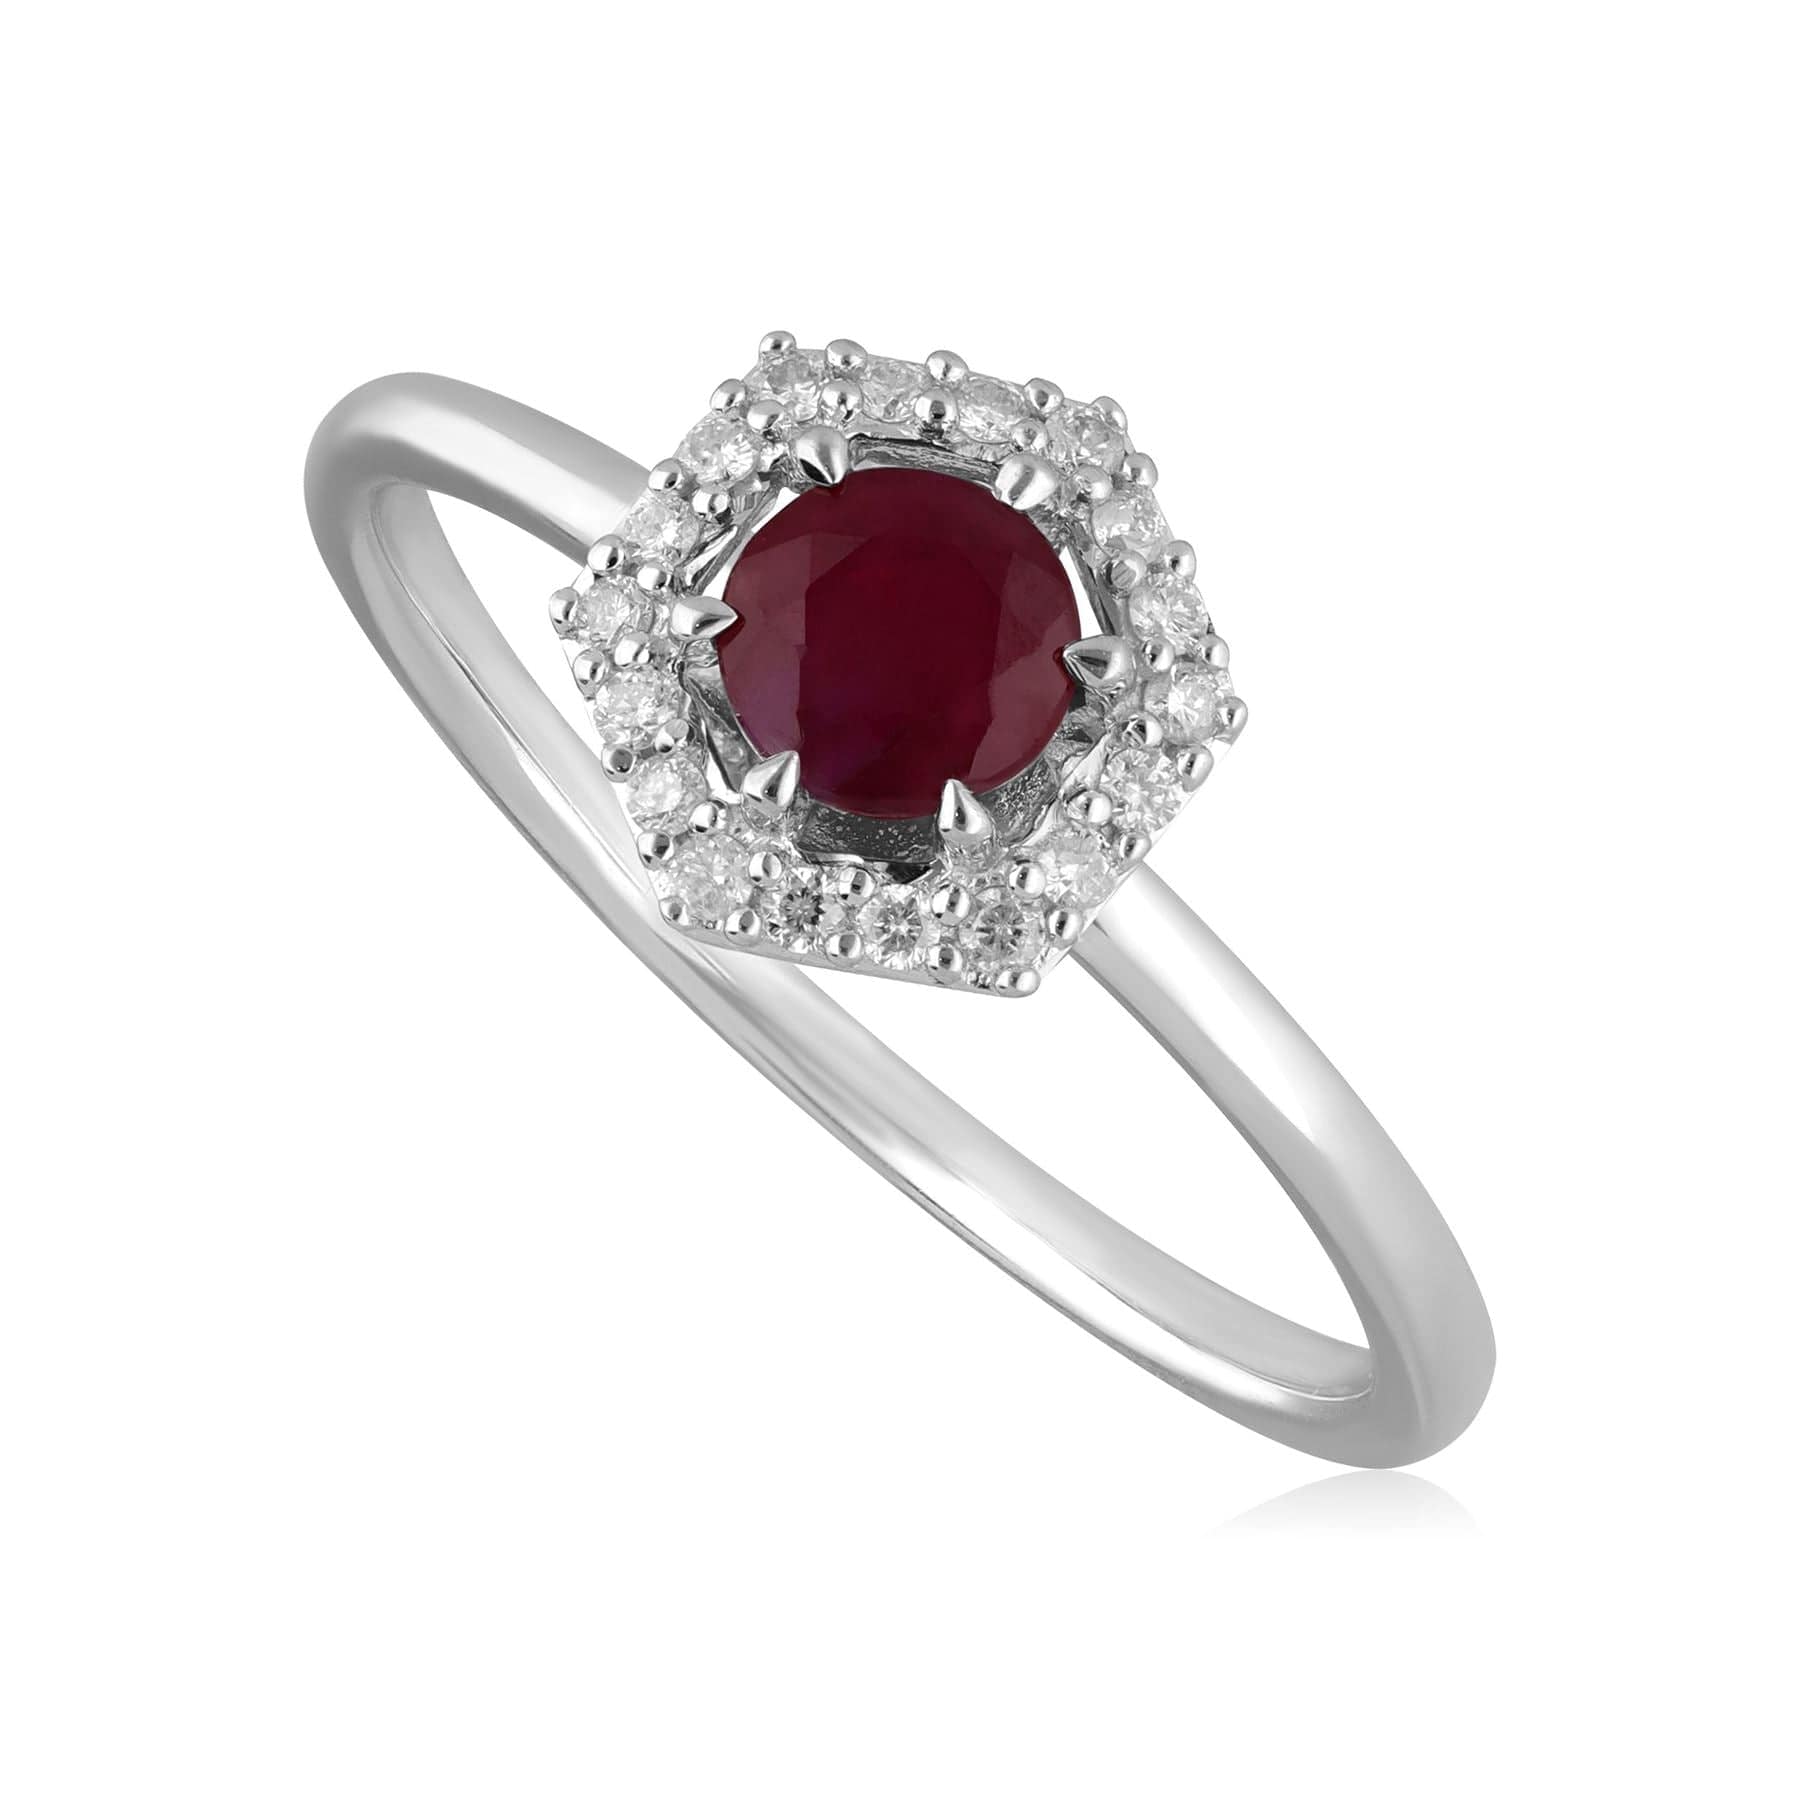 Image of 9ct White Gold 0.48ct Ruby & Diamond Halo Engagement Ring